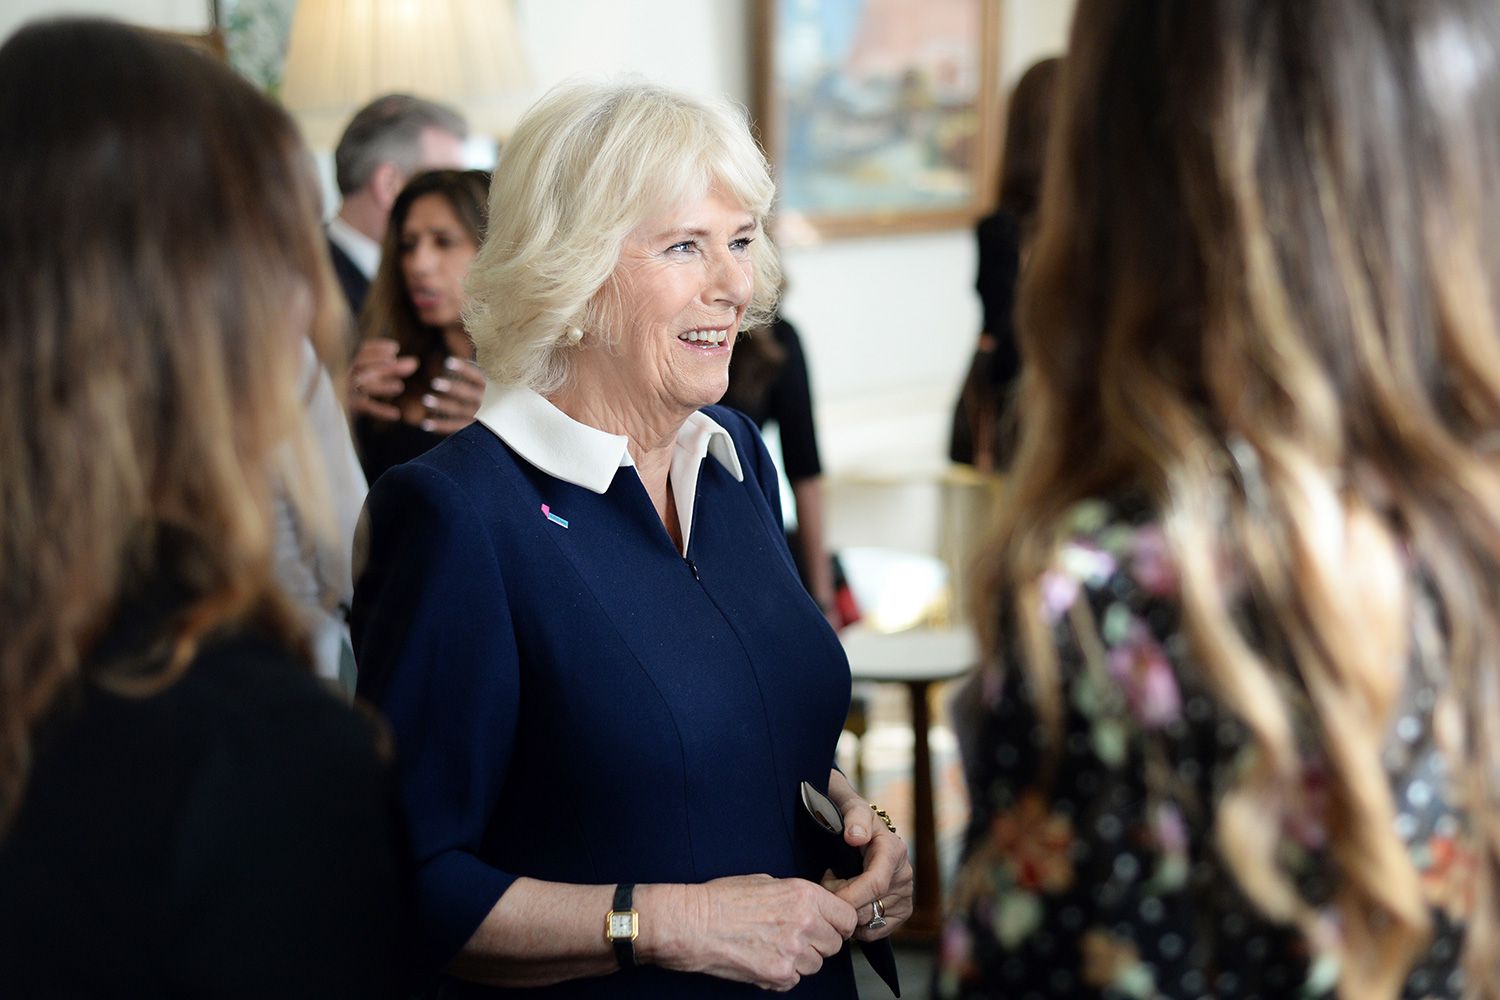 Camilla, Duchess of Cornwall hosts a reception to acknowledge the 15th anniversary of domestic abuse charity SafeLives at Clarence House on February 12, 2020 in London, England